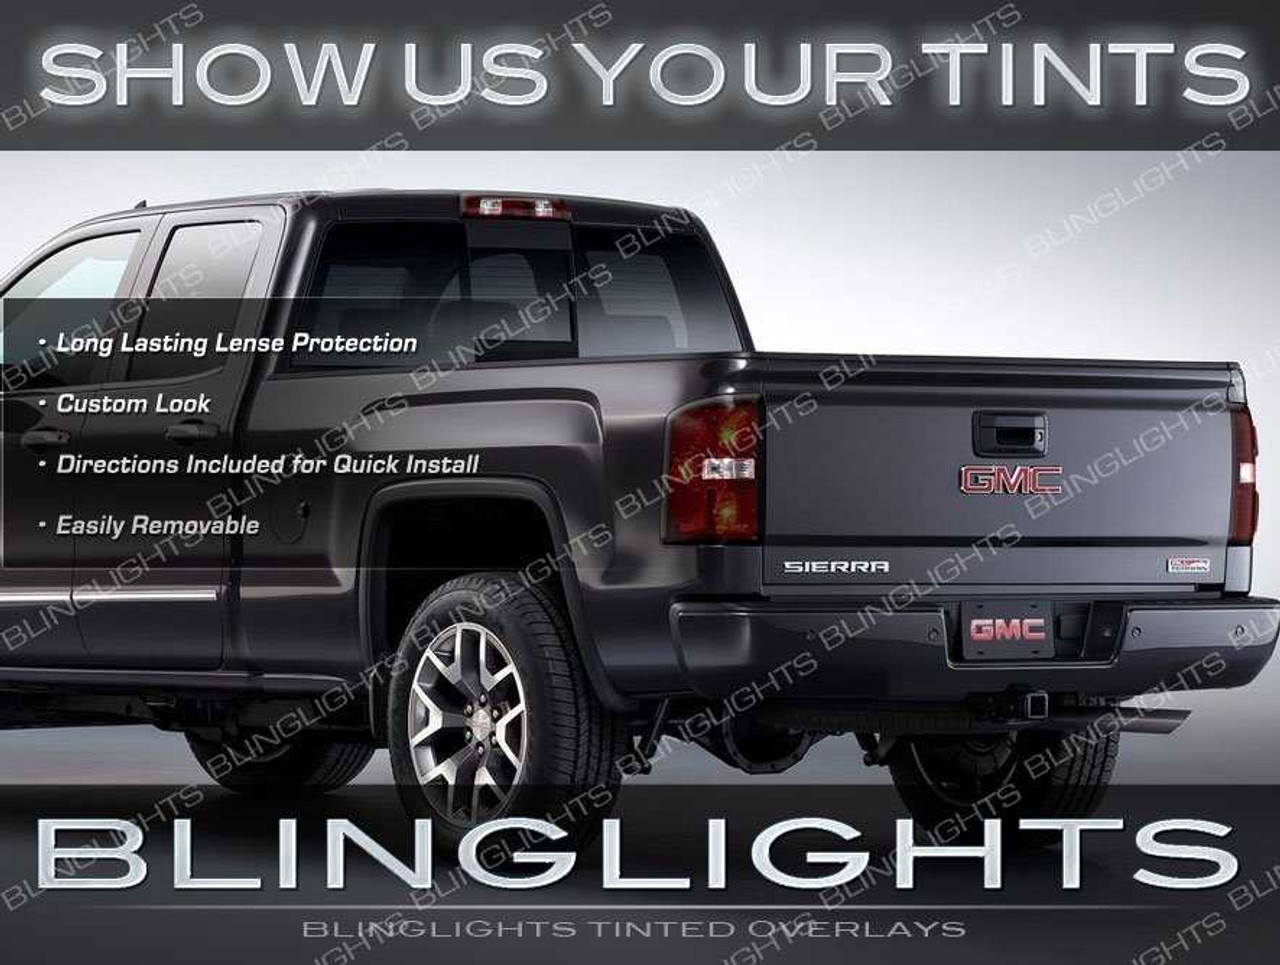 Chevrolet Silverado Tinted Tail Lamps Lights Overlays Kit Smoked Film Protection Chevrolet